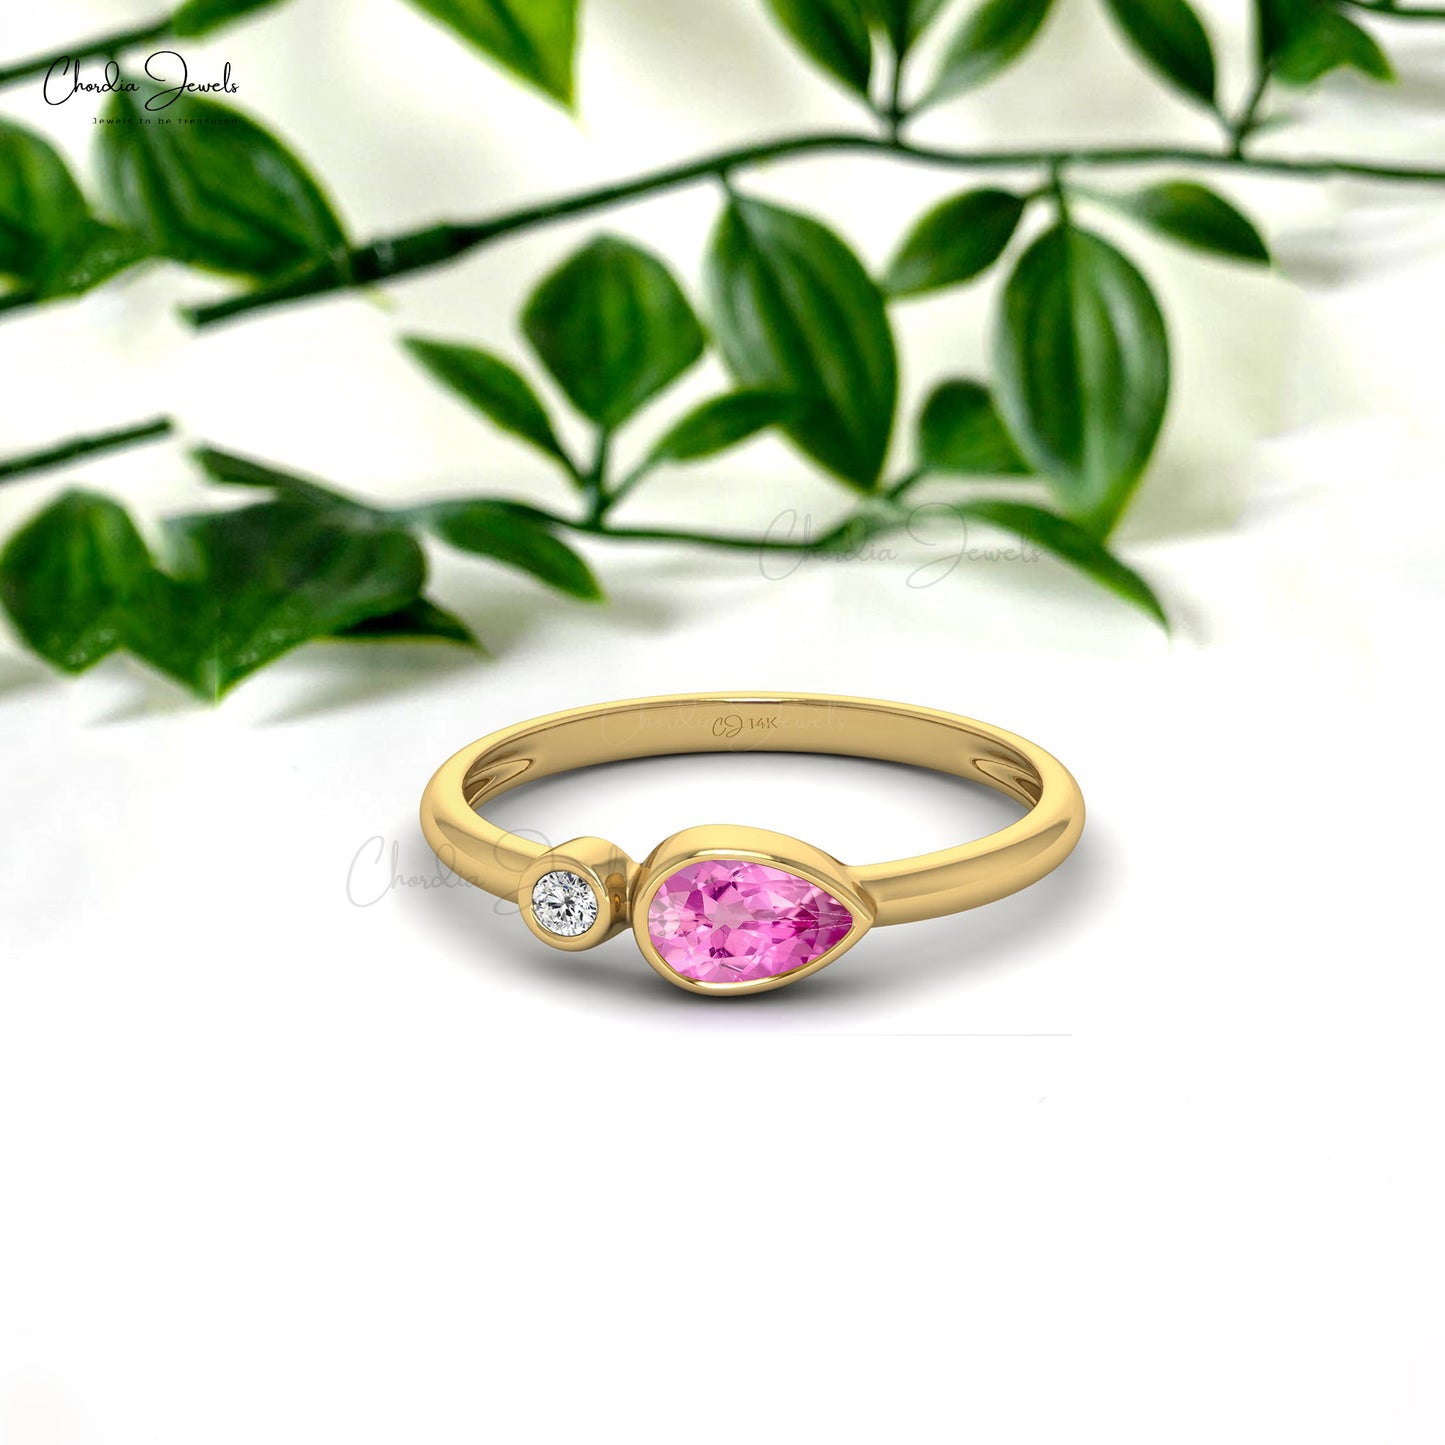 AAA Pink Sapphire Dainty Promise Ring 6x4mm Pear Cut Natural Gemstone Fine Jewelry 14k Real Gold Handmade Fine Jewelry